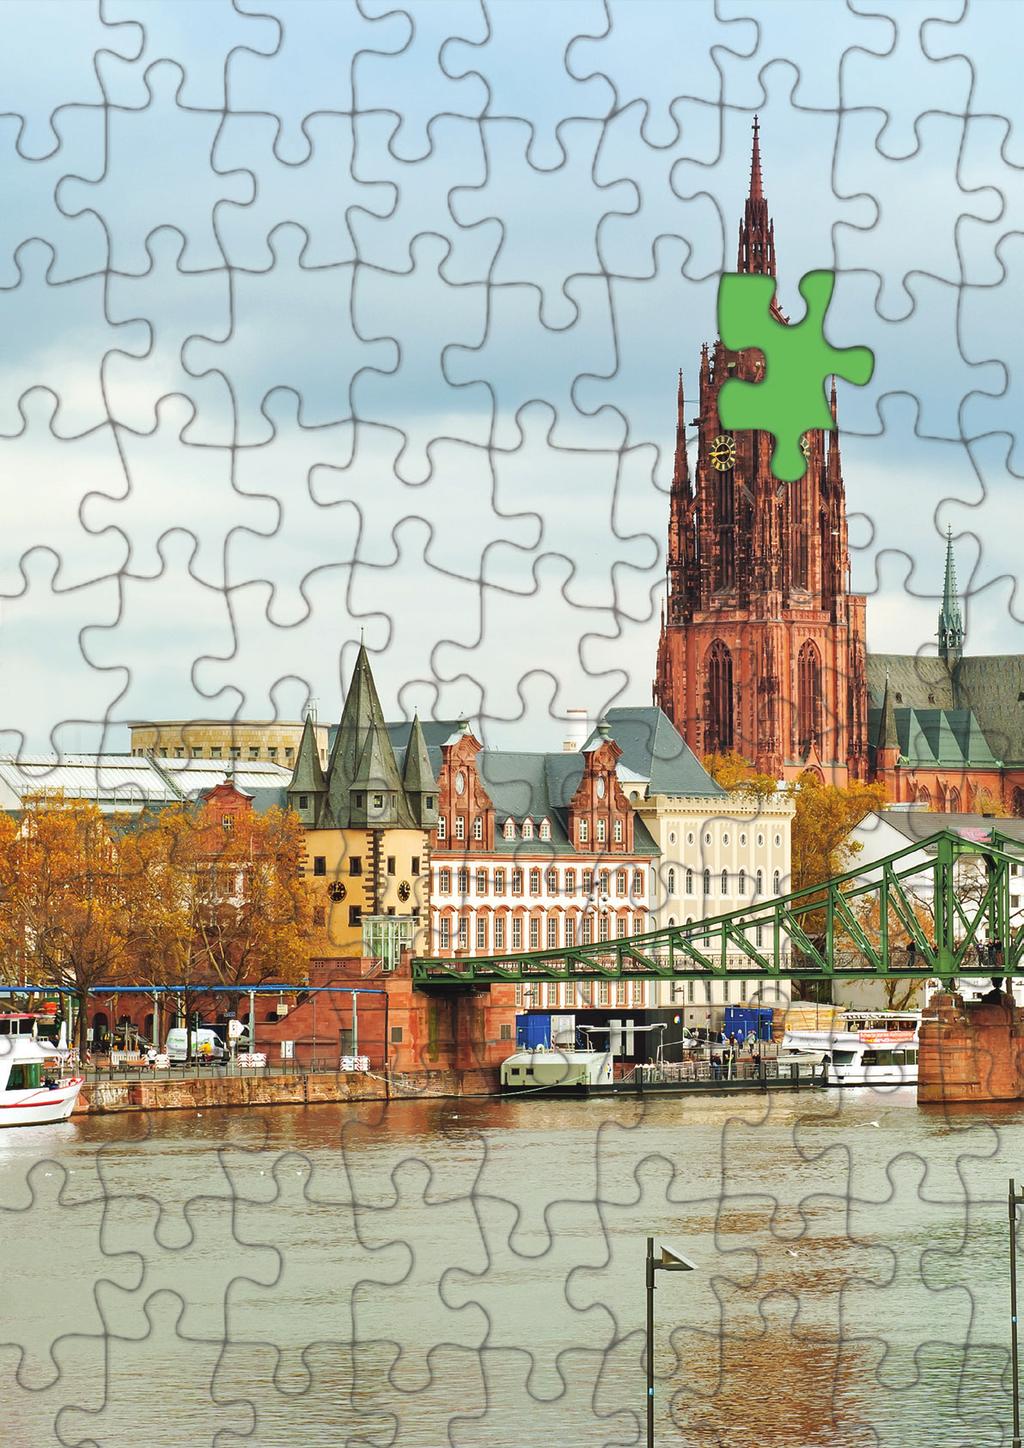 IS YOUR SFTR SOLUTION MISSING A PIECE OF THE PUZZLE? WITH COUNTLESS PIECES TO PUT TOGETHER, EQUILEND AND TRAX ARE SOLVING THE SFTR PUZZLE. CONTACT US: SFTR@EQUILEND.COM POST-TRADE@TRAXMARKETS.